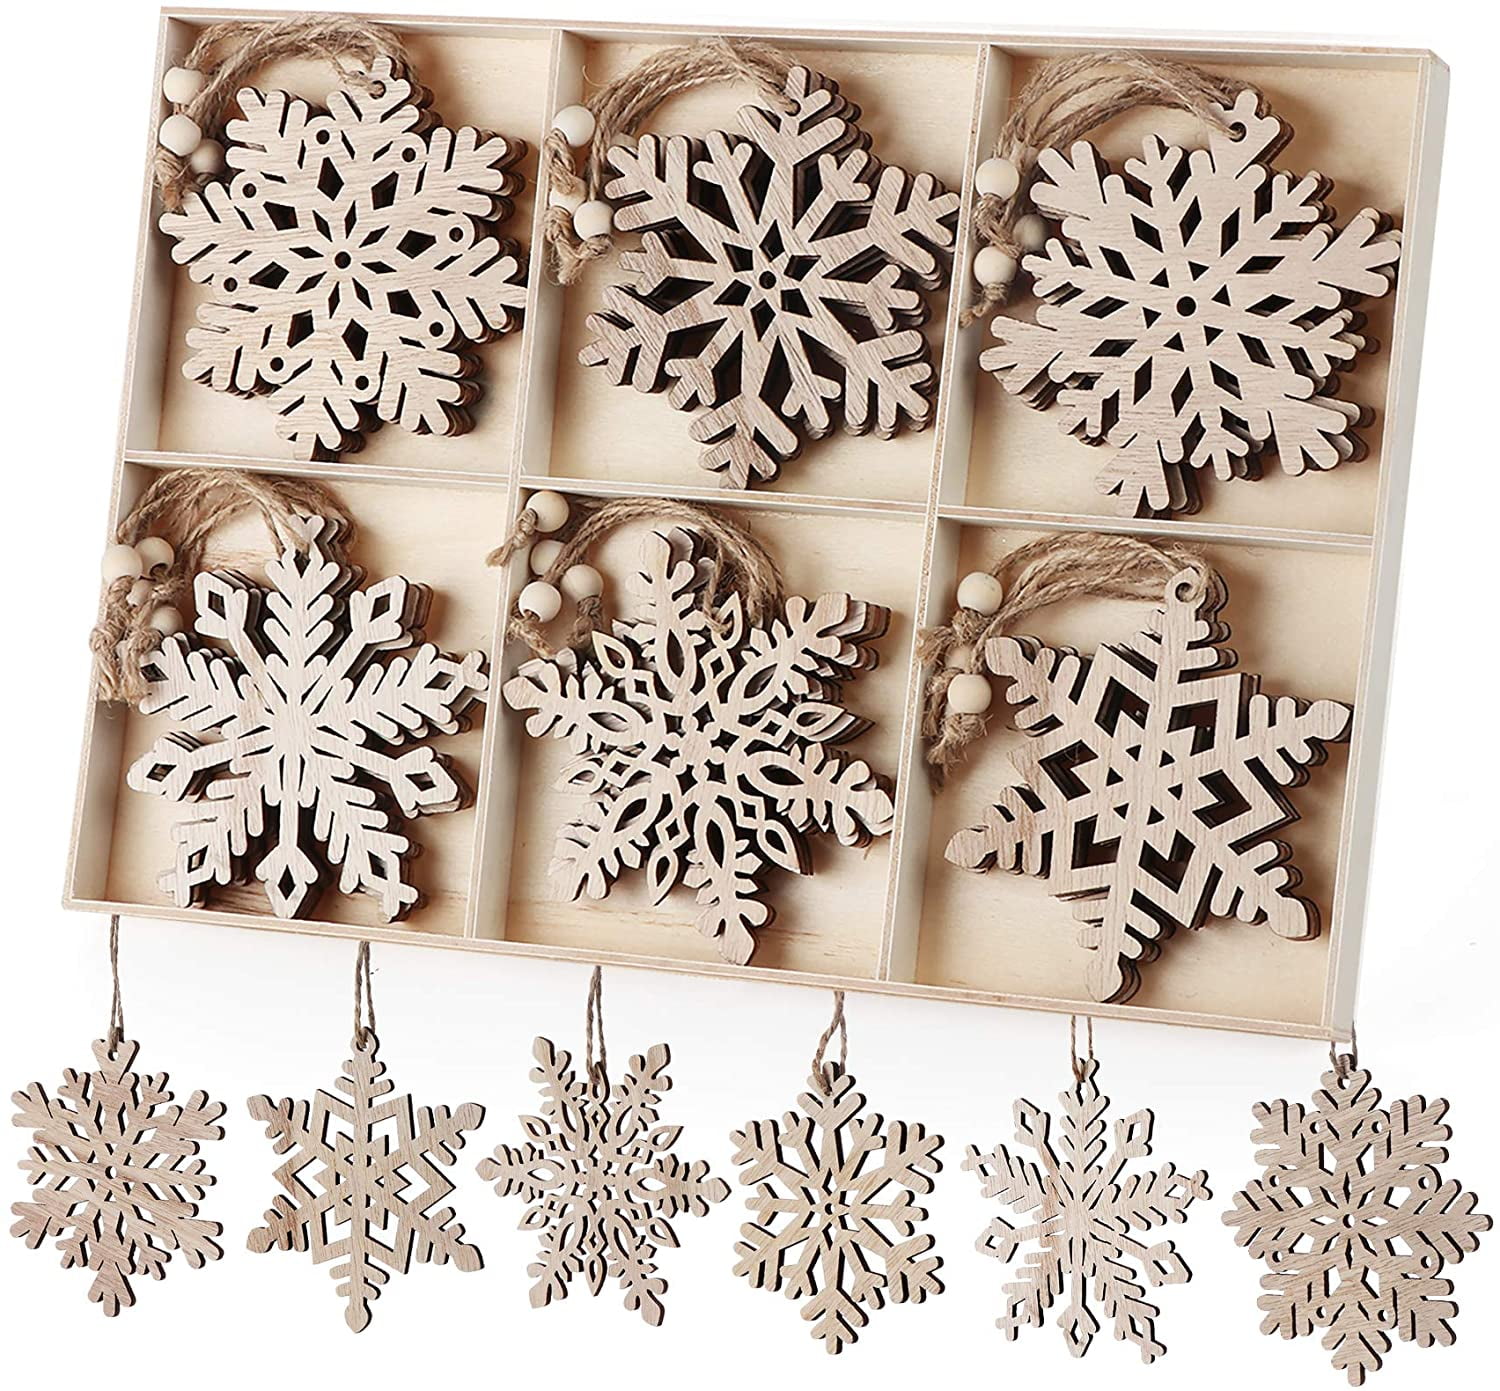 24Pcs Wooden Snowflakes Ornaments 4'' Christmas Tree Hanging Decorations  Rustic Ornament Wood Crafts